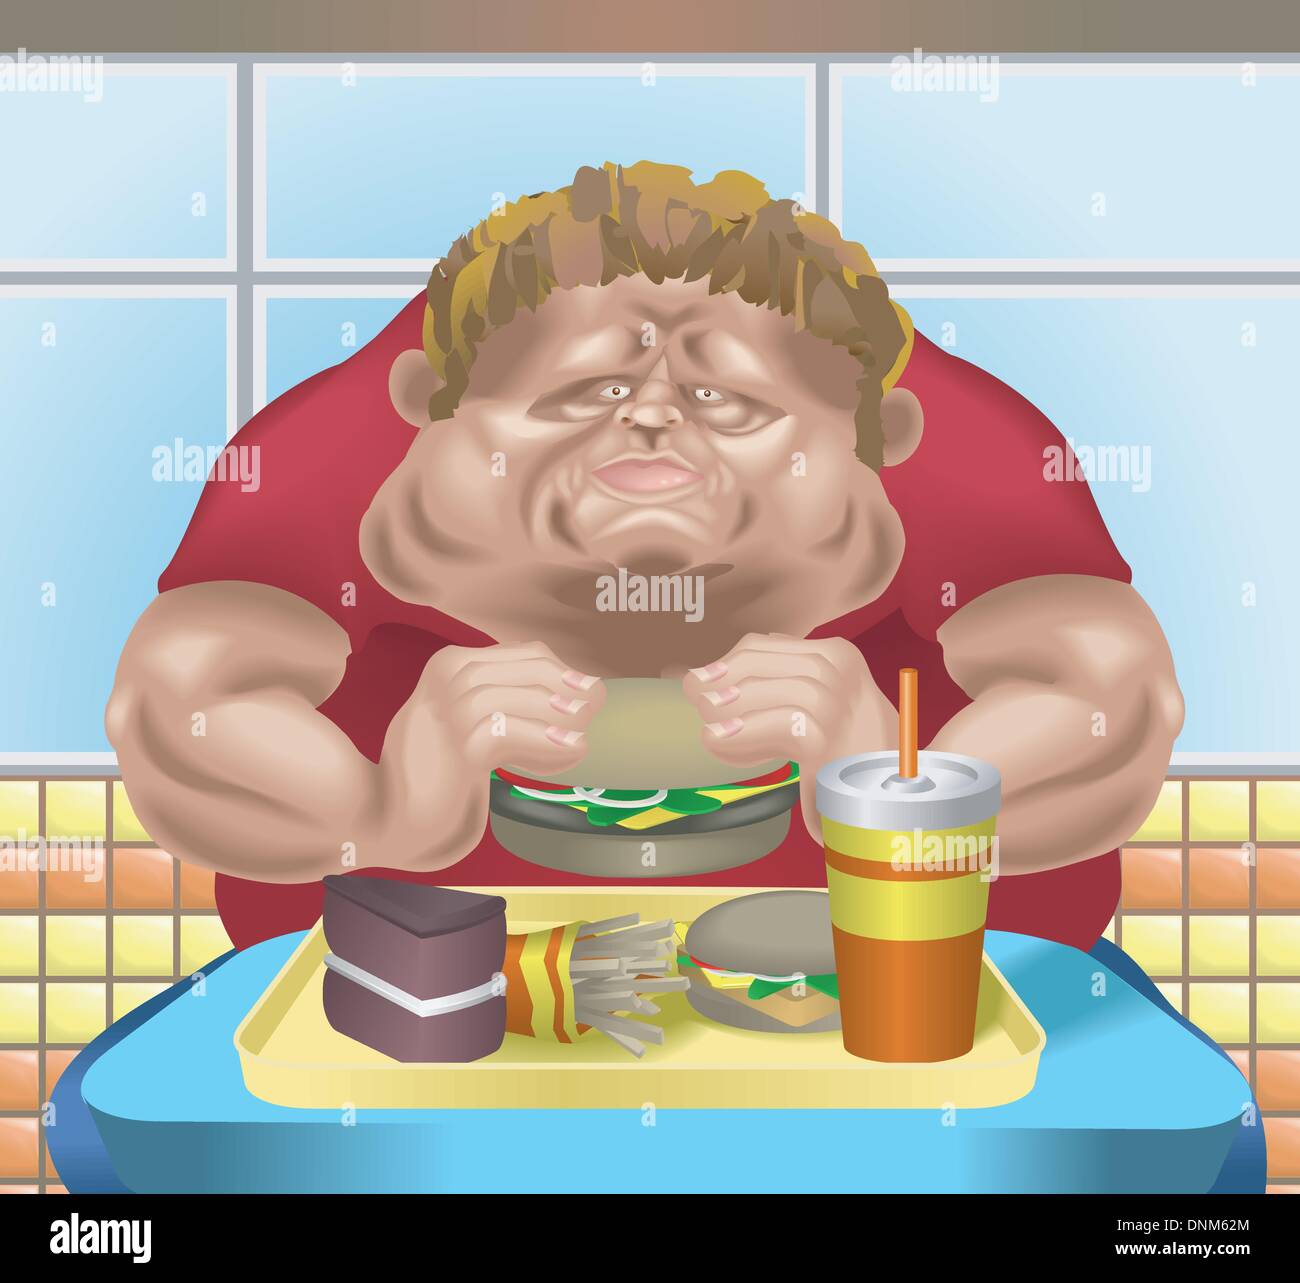 An obese man in fast food restaurant consuming junk food. No meshes used. Stock Vector